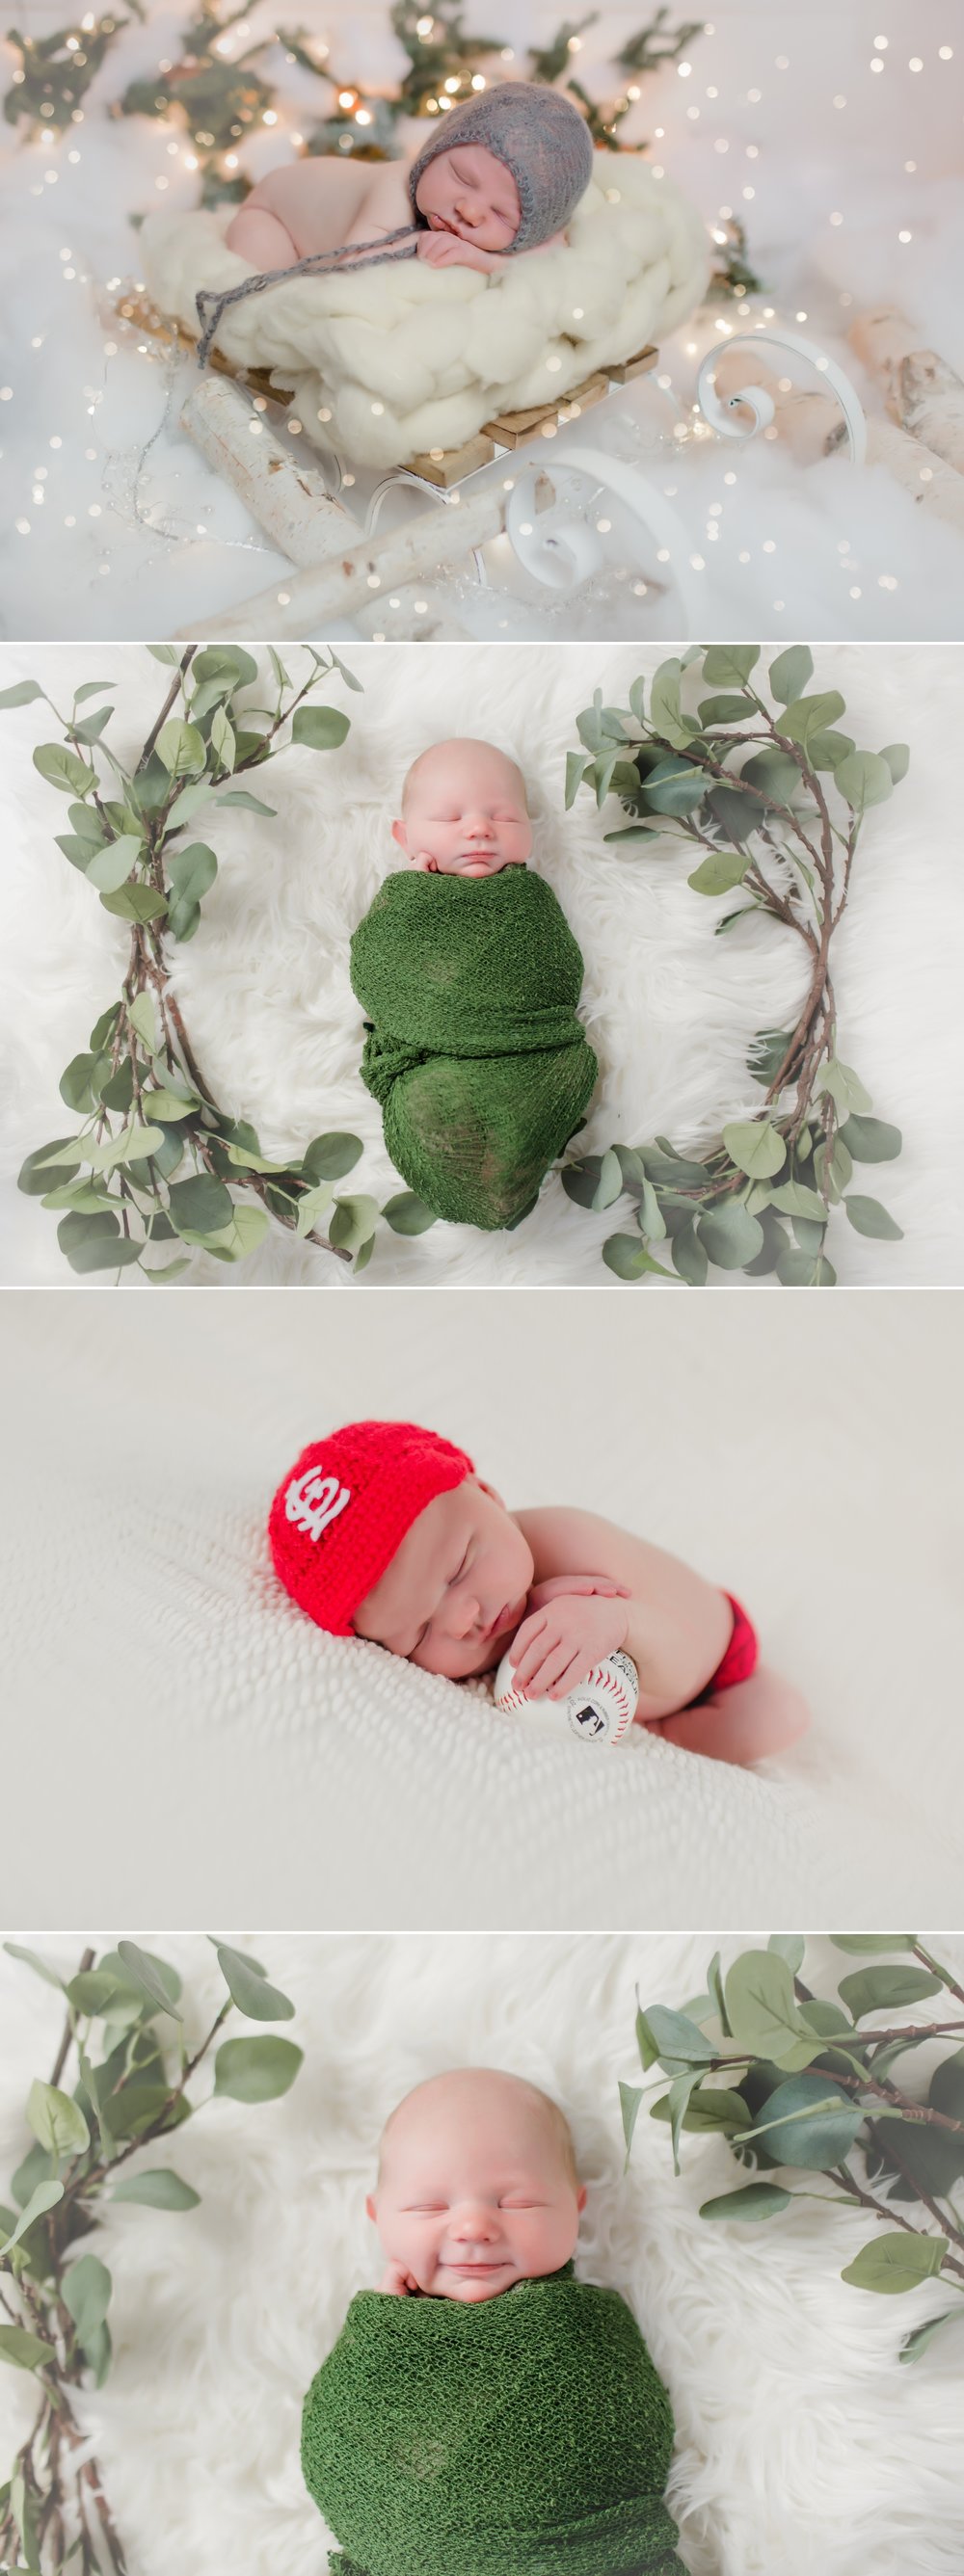  newborn_boy_photography_at_home_lifestyle_session_brothers_sibling_winter_ideas 6 